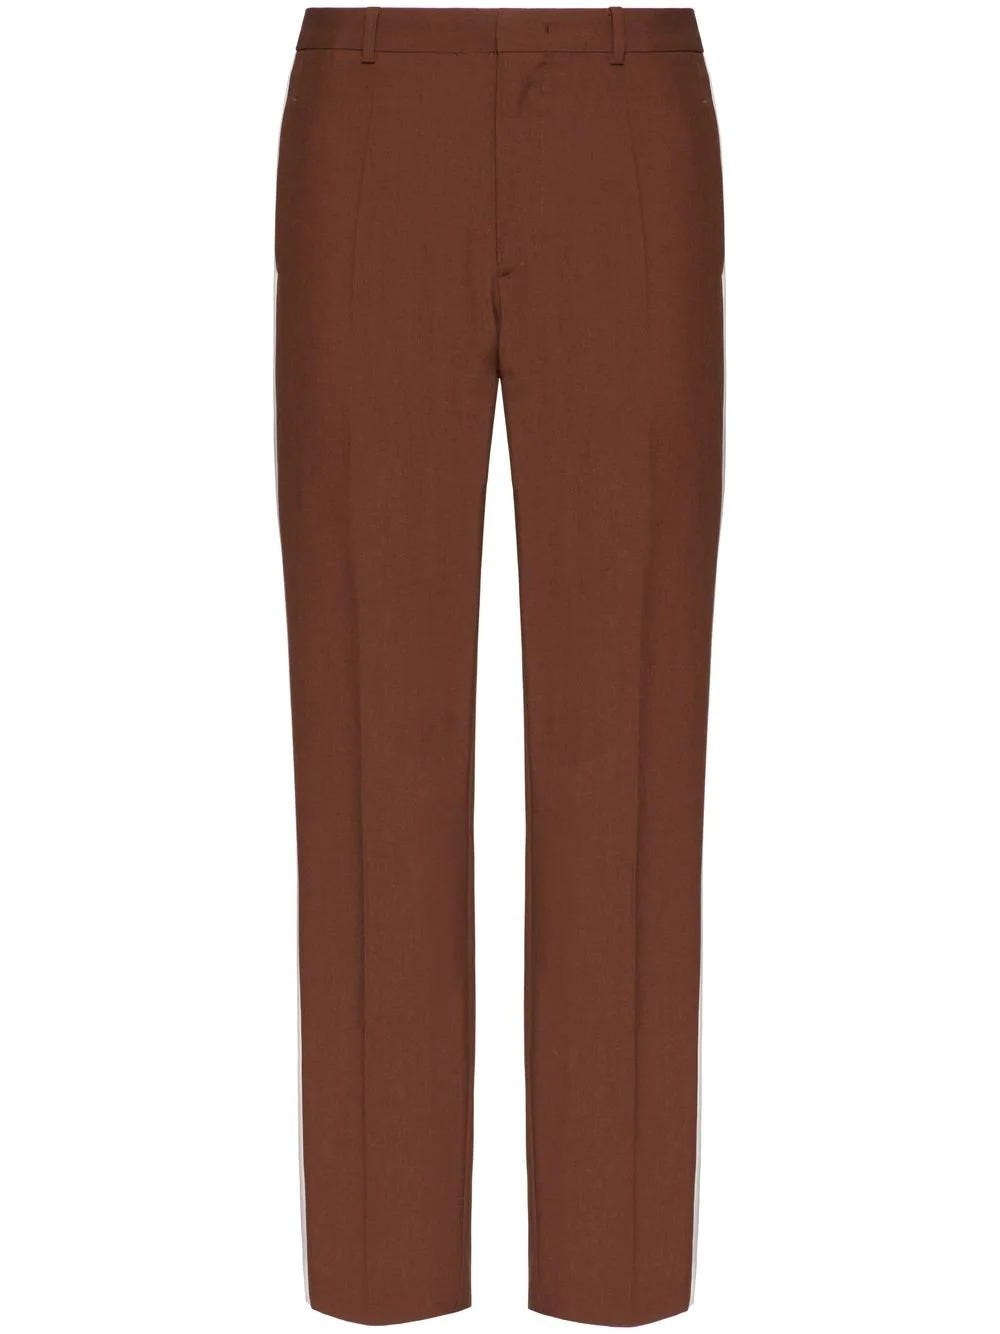 VALENTINO VALENTINO BROWN PANTS WITH WHITE SIDE STRIPE